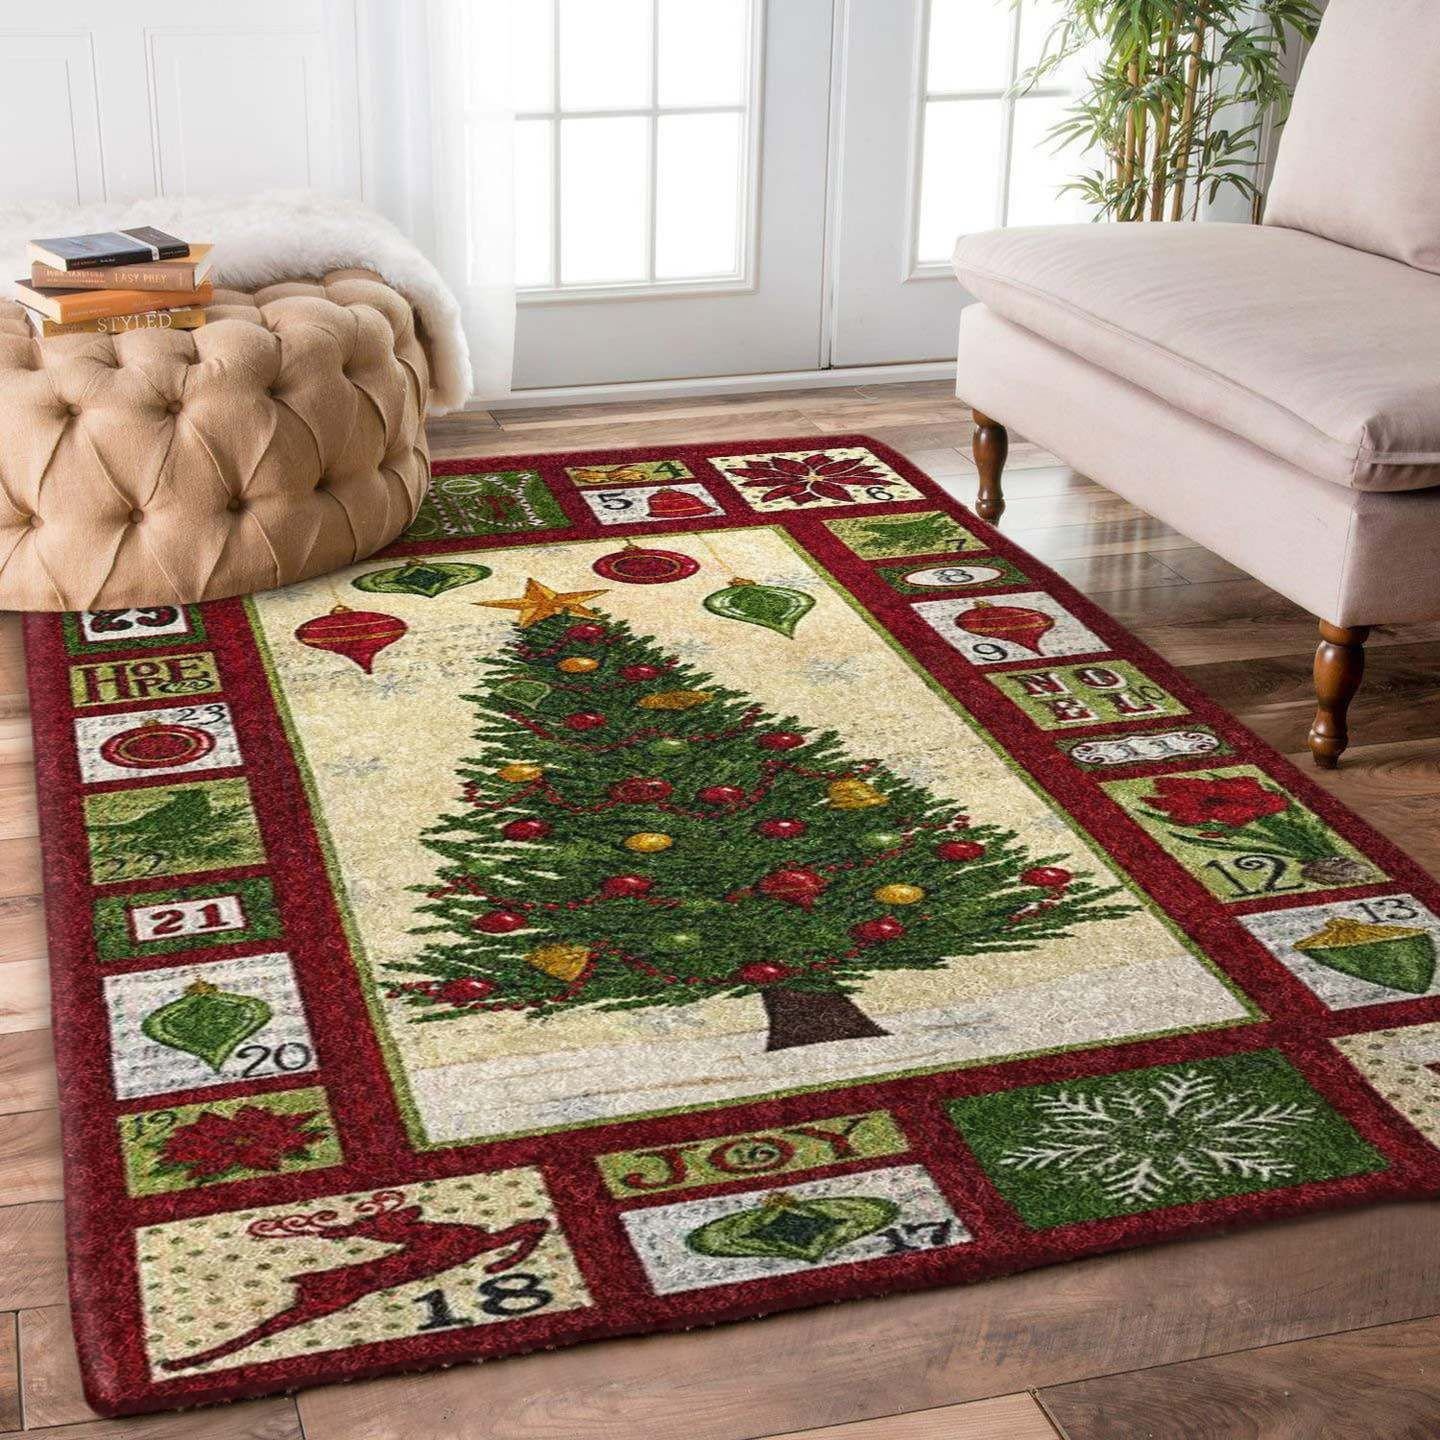 CARU-0202 Christmas Area Rug Home Decor - N2T Clothes Store